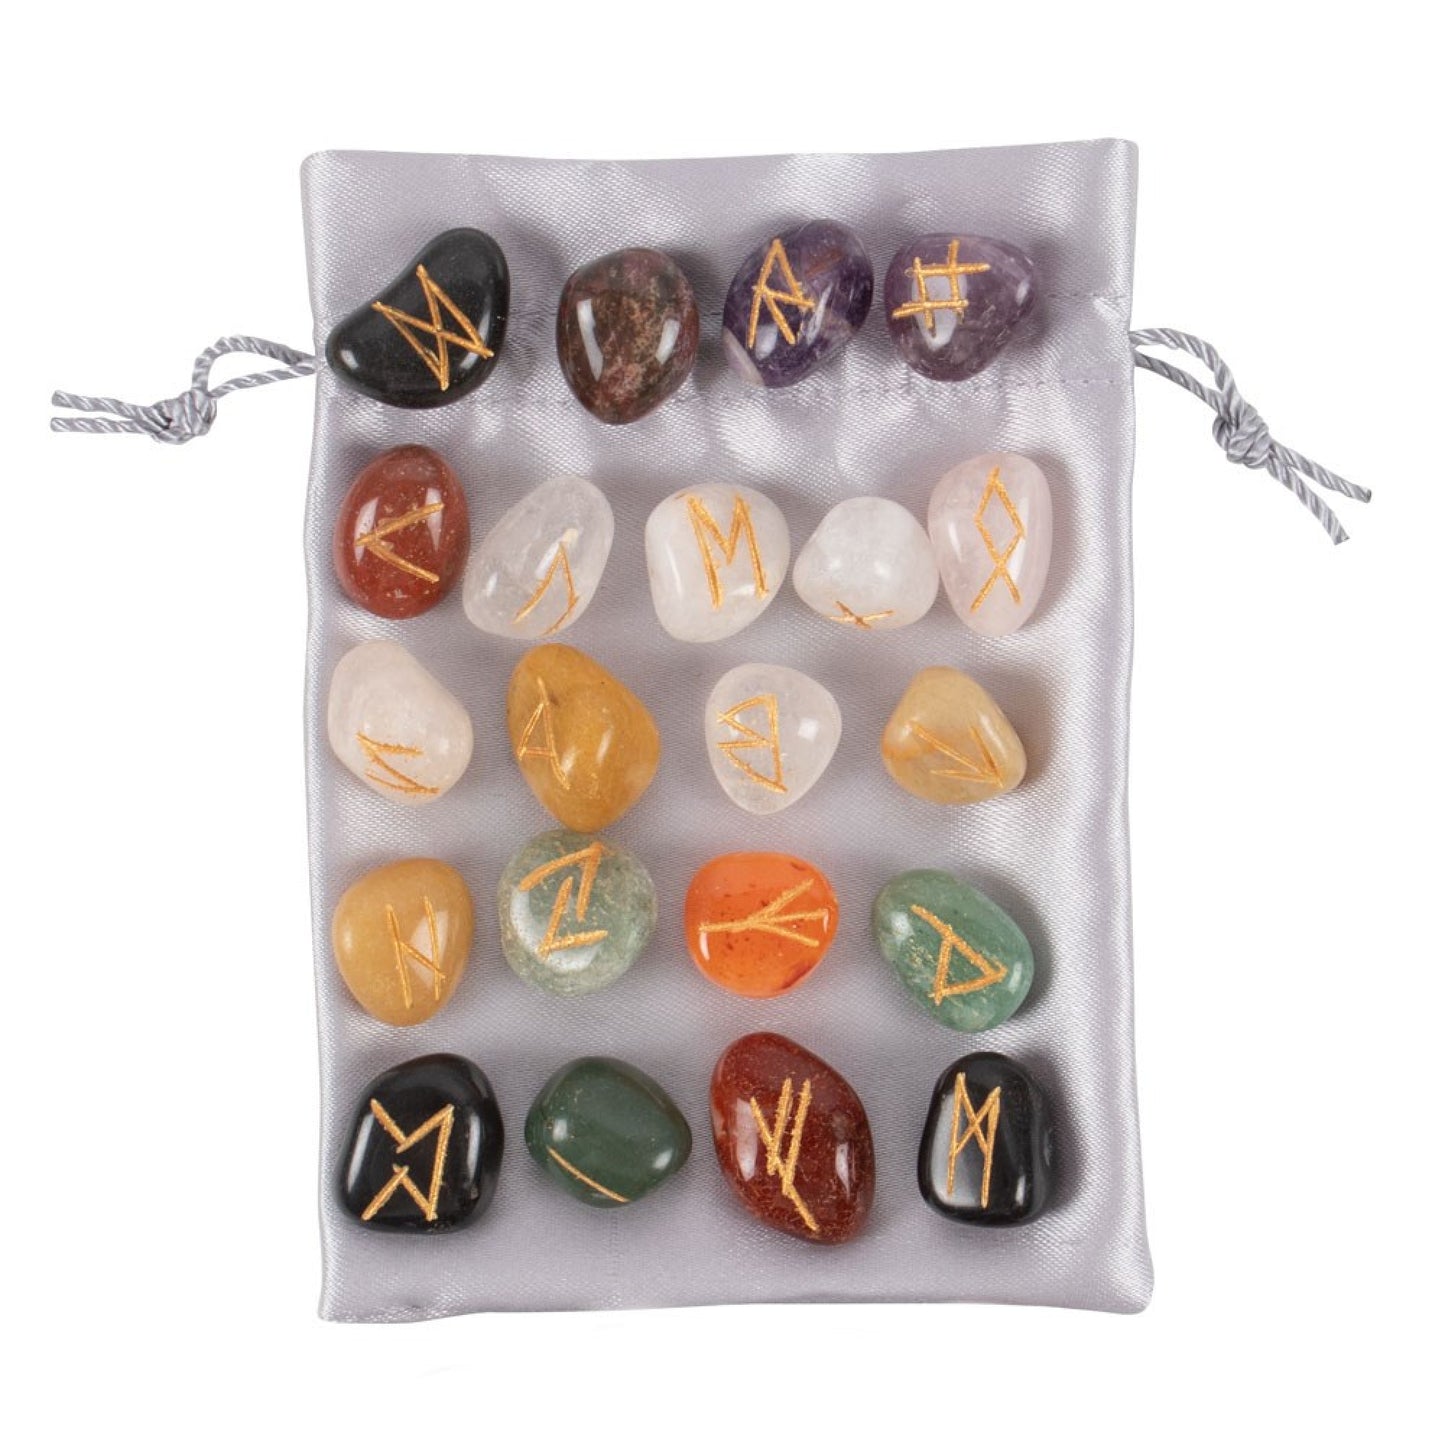 This boxed set of 25 gemstone runes includes a full set of engraved semi precious crystals in a satin drawstring pouch.  Used as an ancient form of divination dating back to the Viking Age.  Gift Box Display Size H 3cm x W 9cm x D 9cm